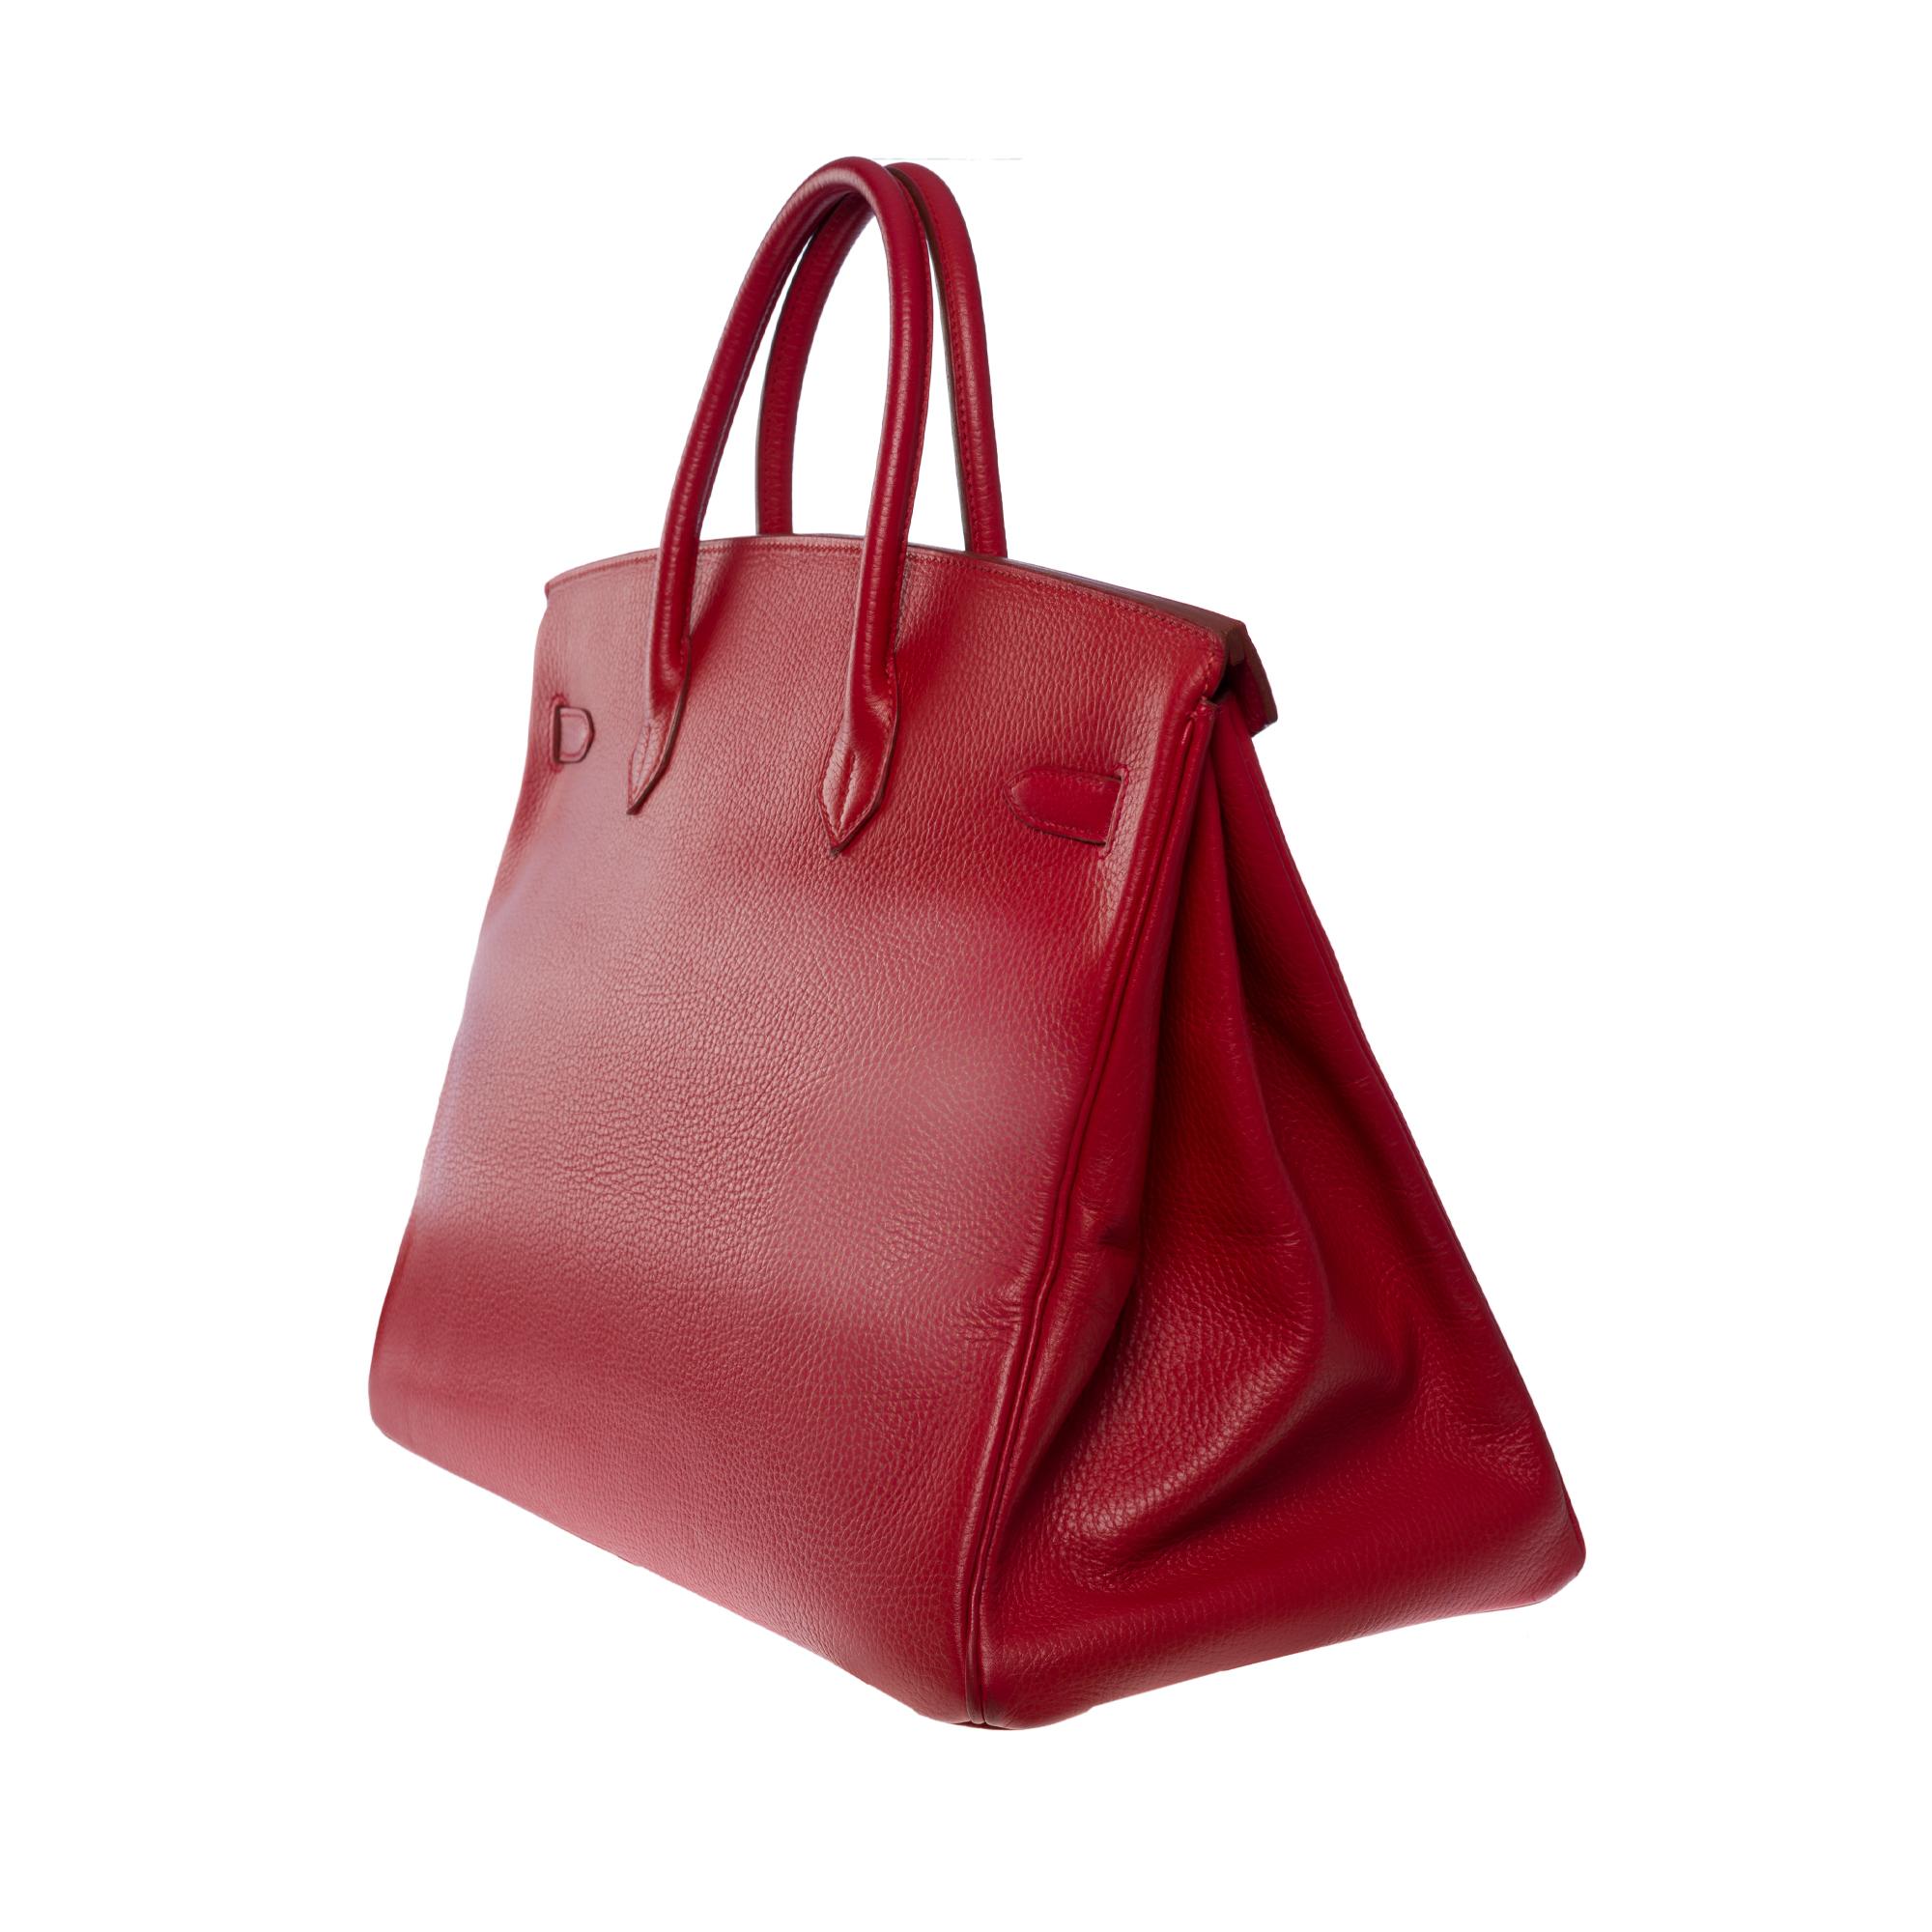 Rare & Collector Hermes Birkin 40cm handbag in Red Vache Ardennes leather, GHW For Sale 1